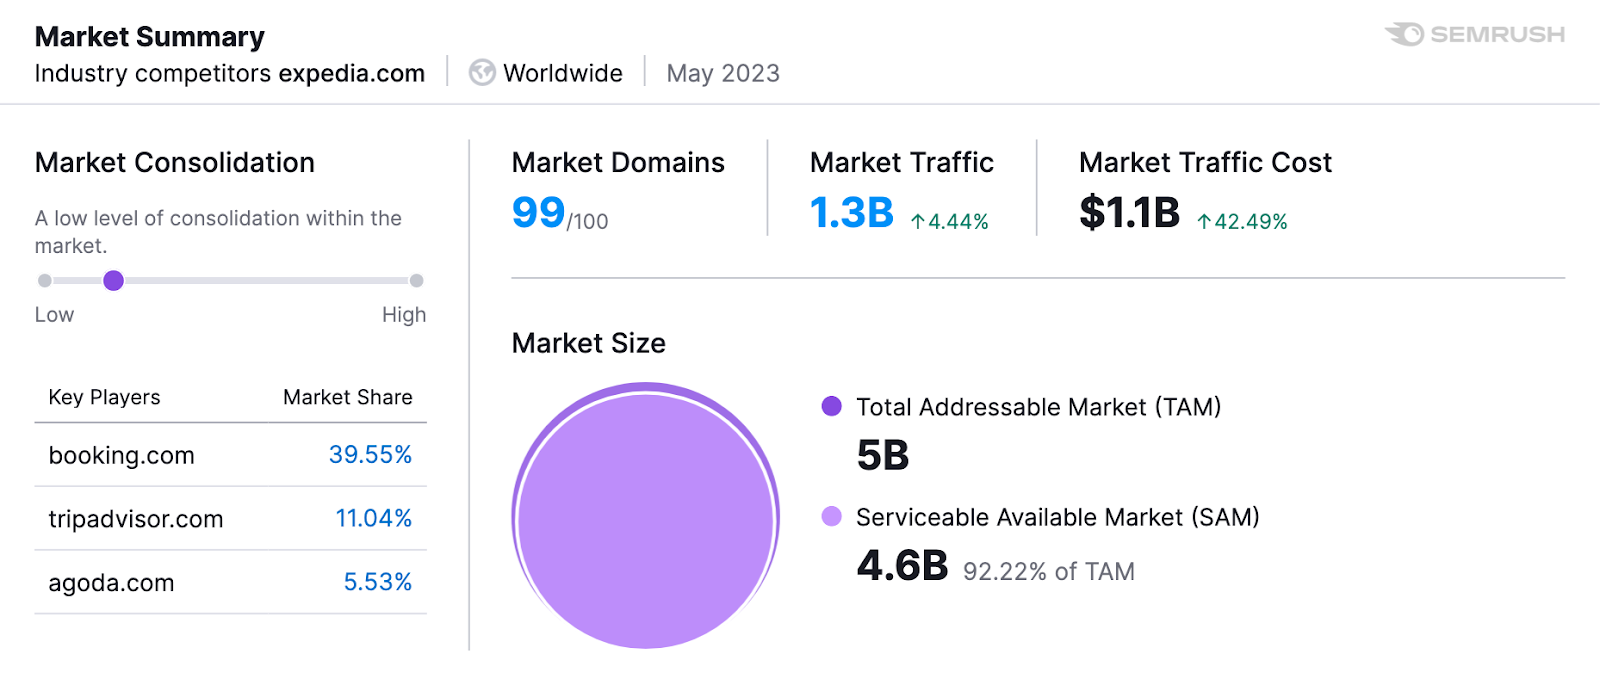 "Market Summary" section in Market Explorer tool shows a summary of your closest competitors, with data on market shares, consolidation, domains, traffic, and market size